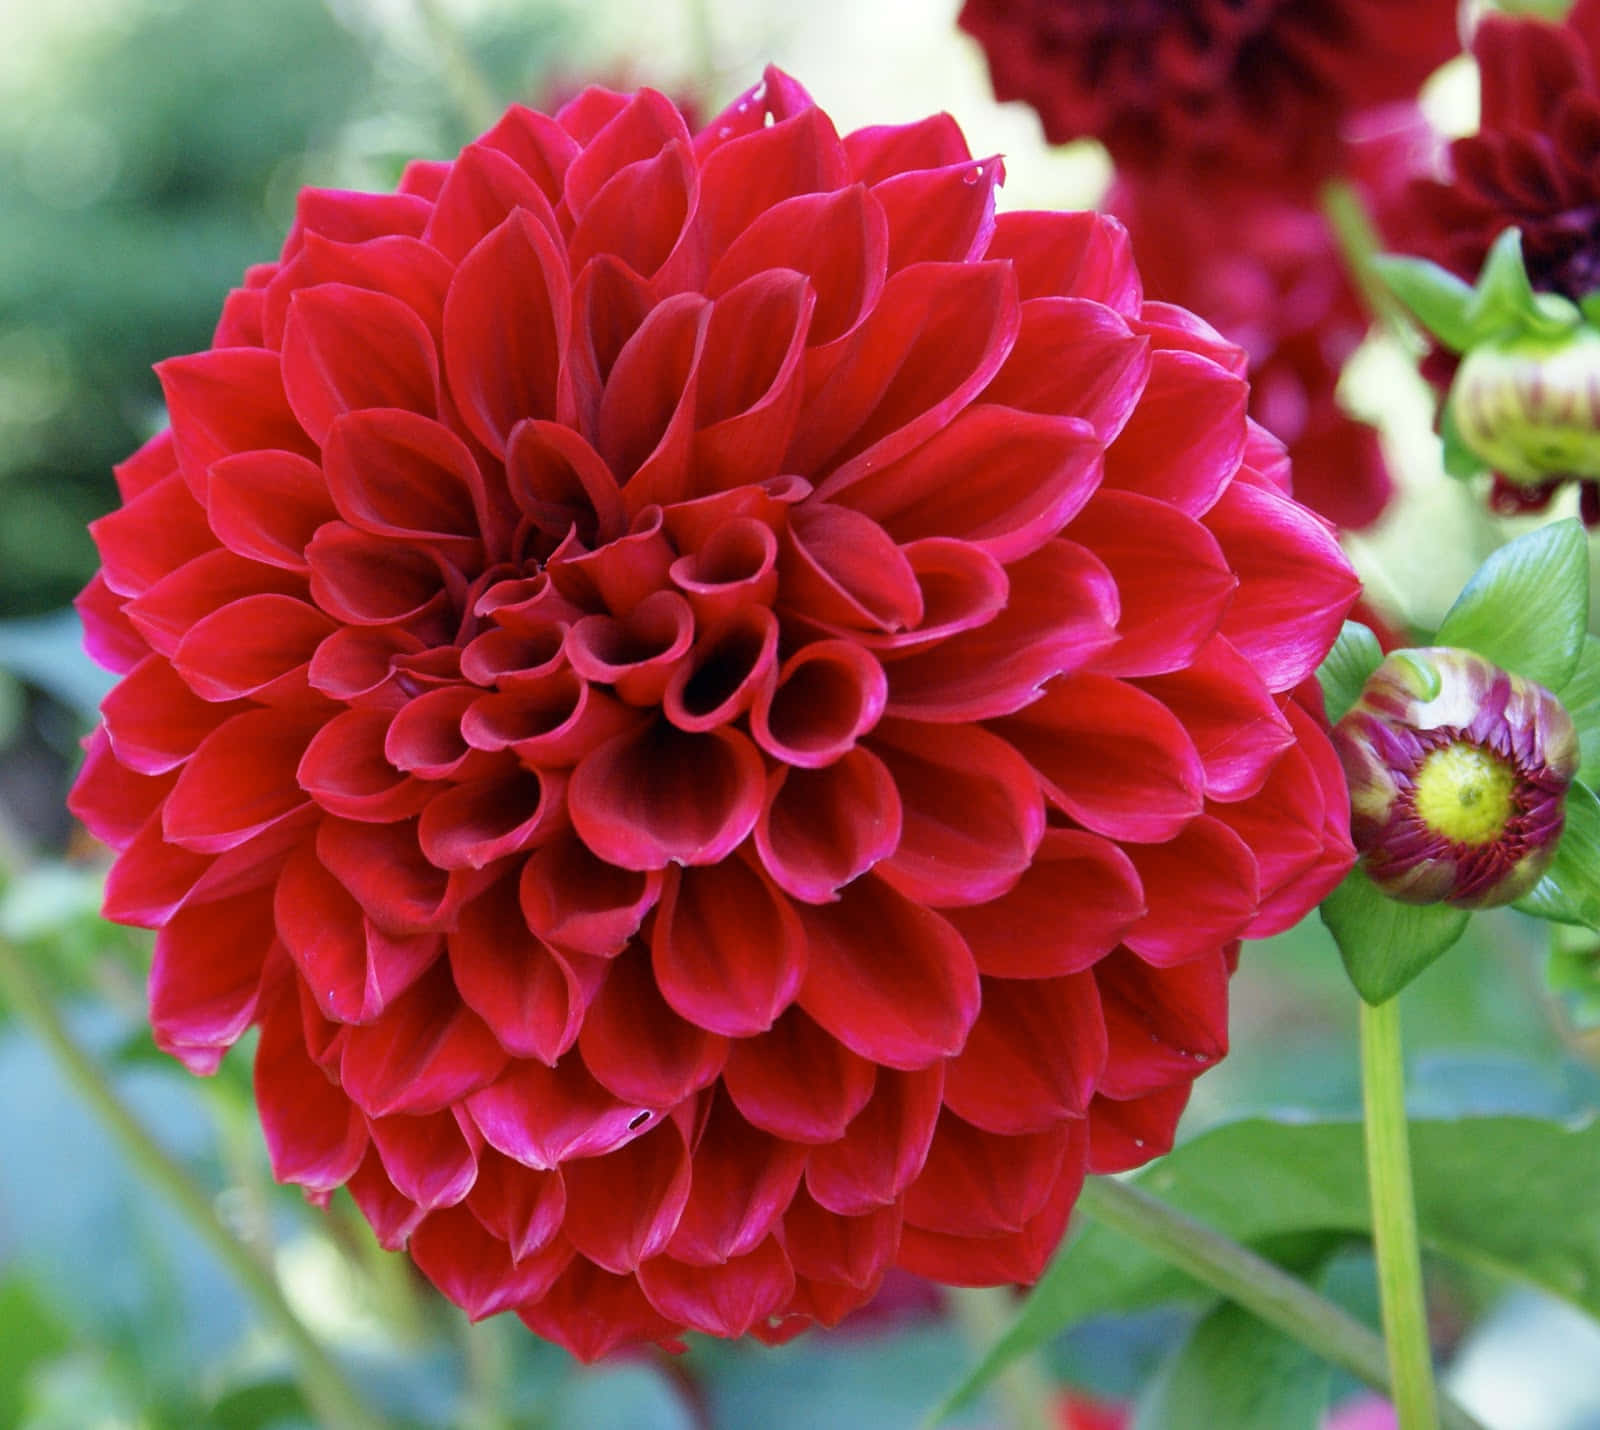 A Red Dahlia Flower With Green Leaves